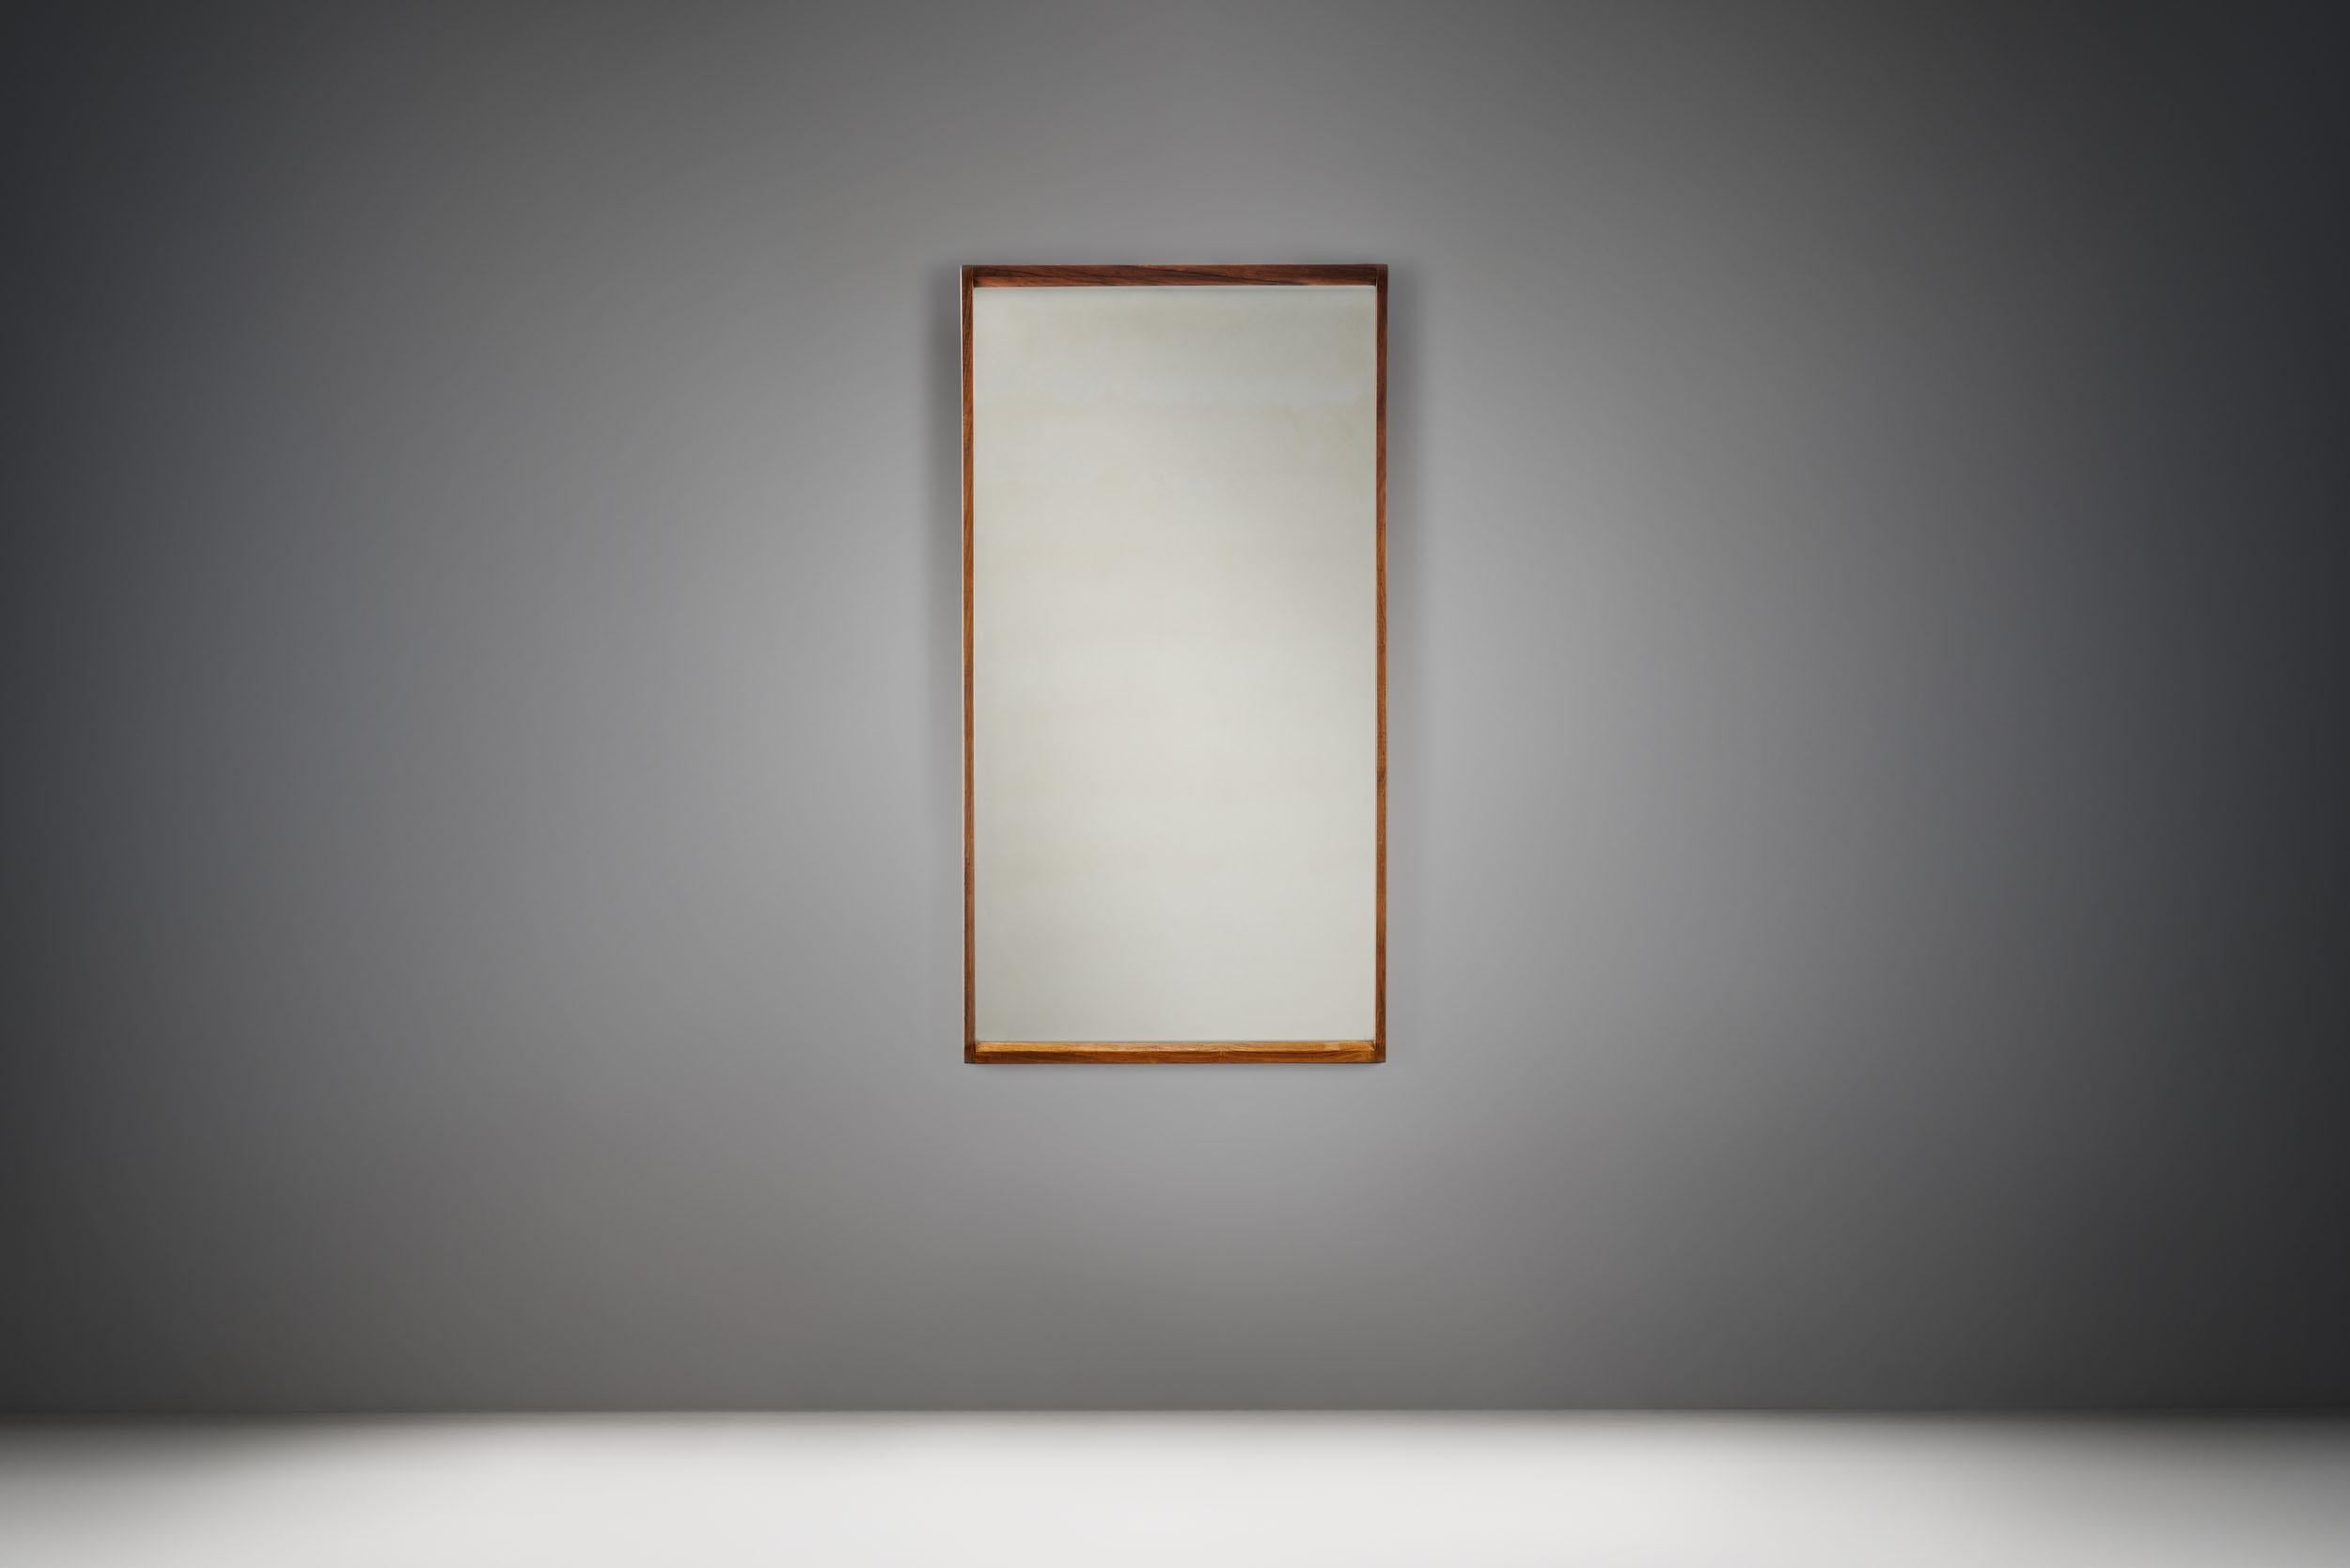 This mirror is from the famed “Hallmöbel” (Hall furniture) series by Danish designer Kai Kristiansen. With an overall look and details that represent mid-century Danish Modernism, this “No. 146” mirror is rooted in tradition.

As it can be